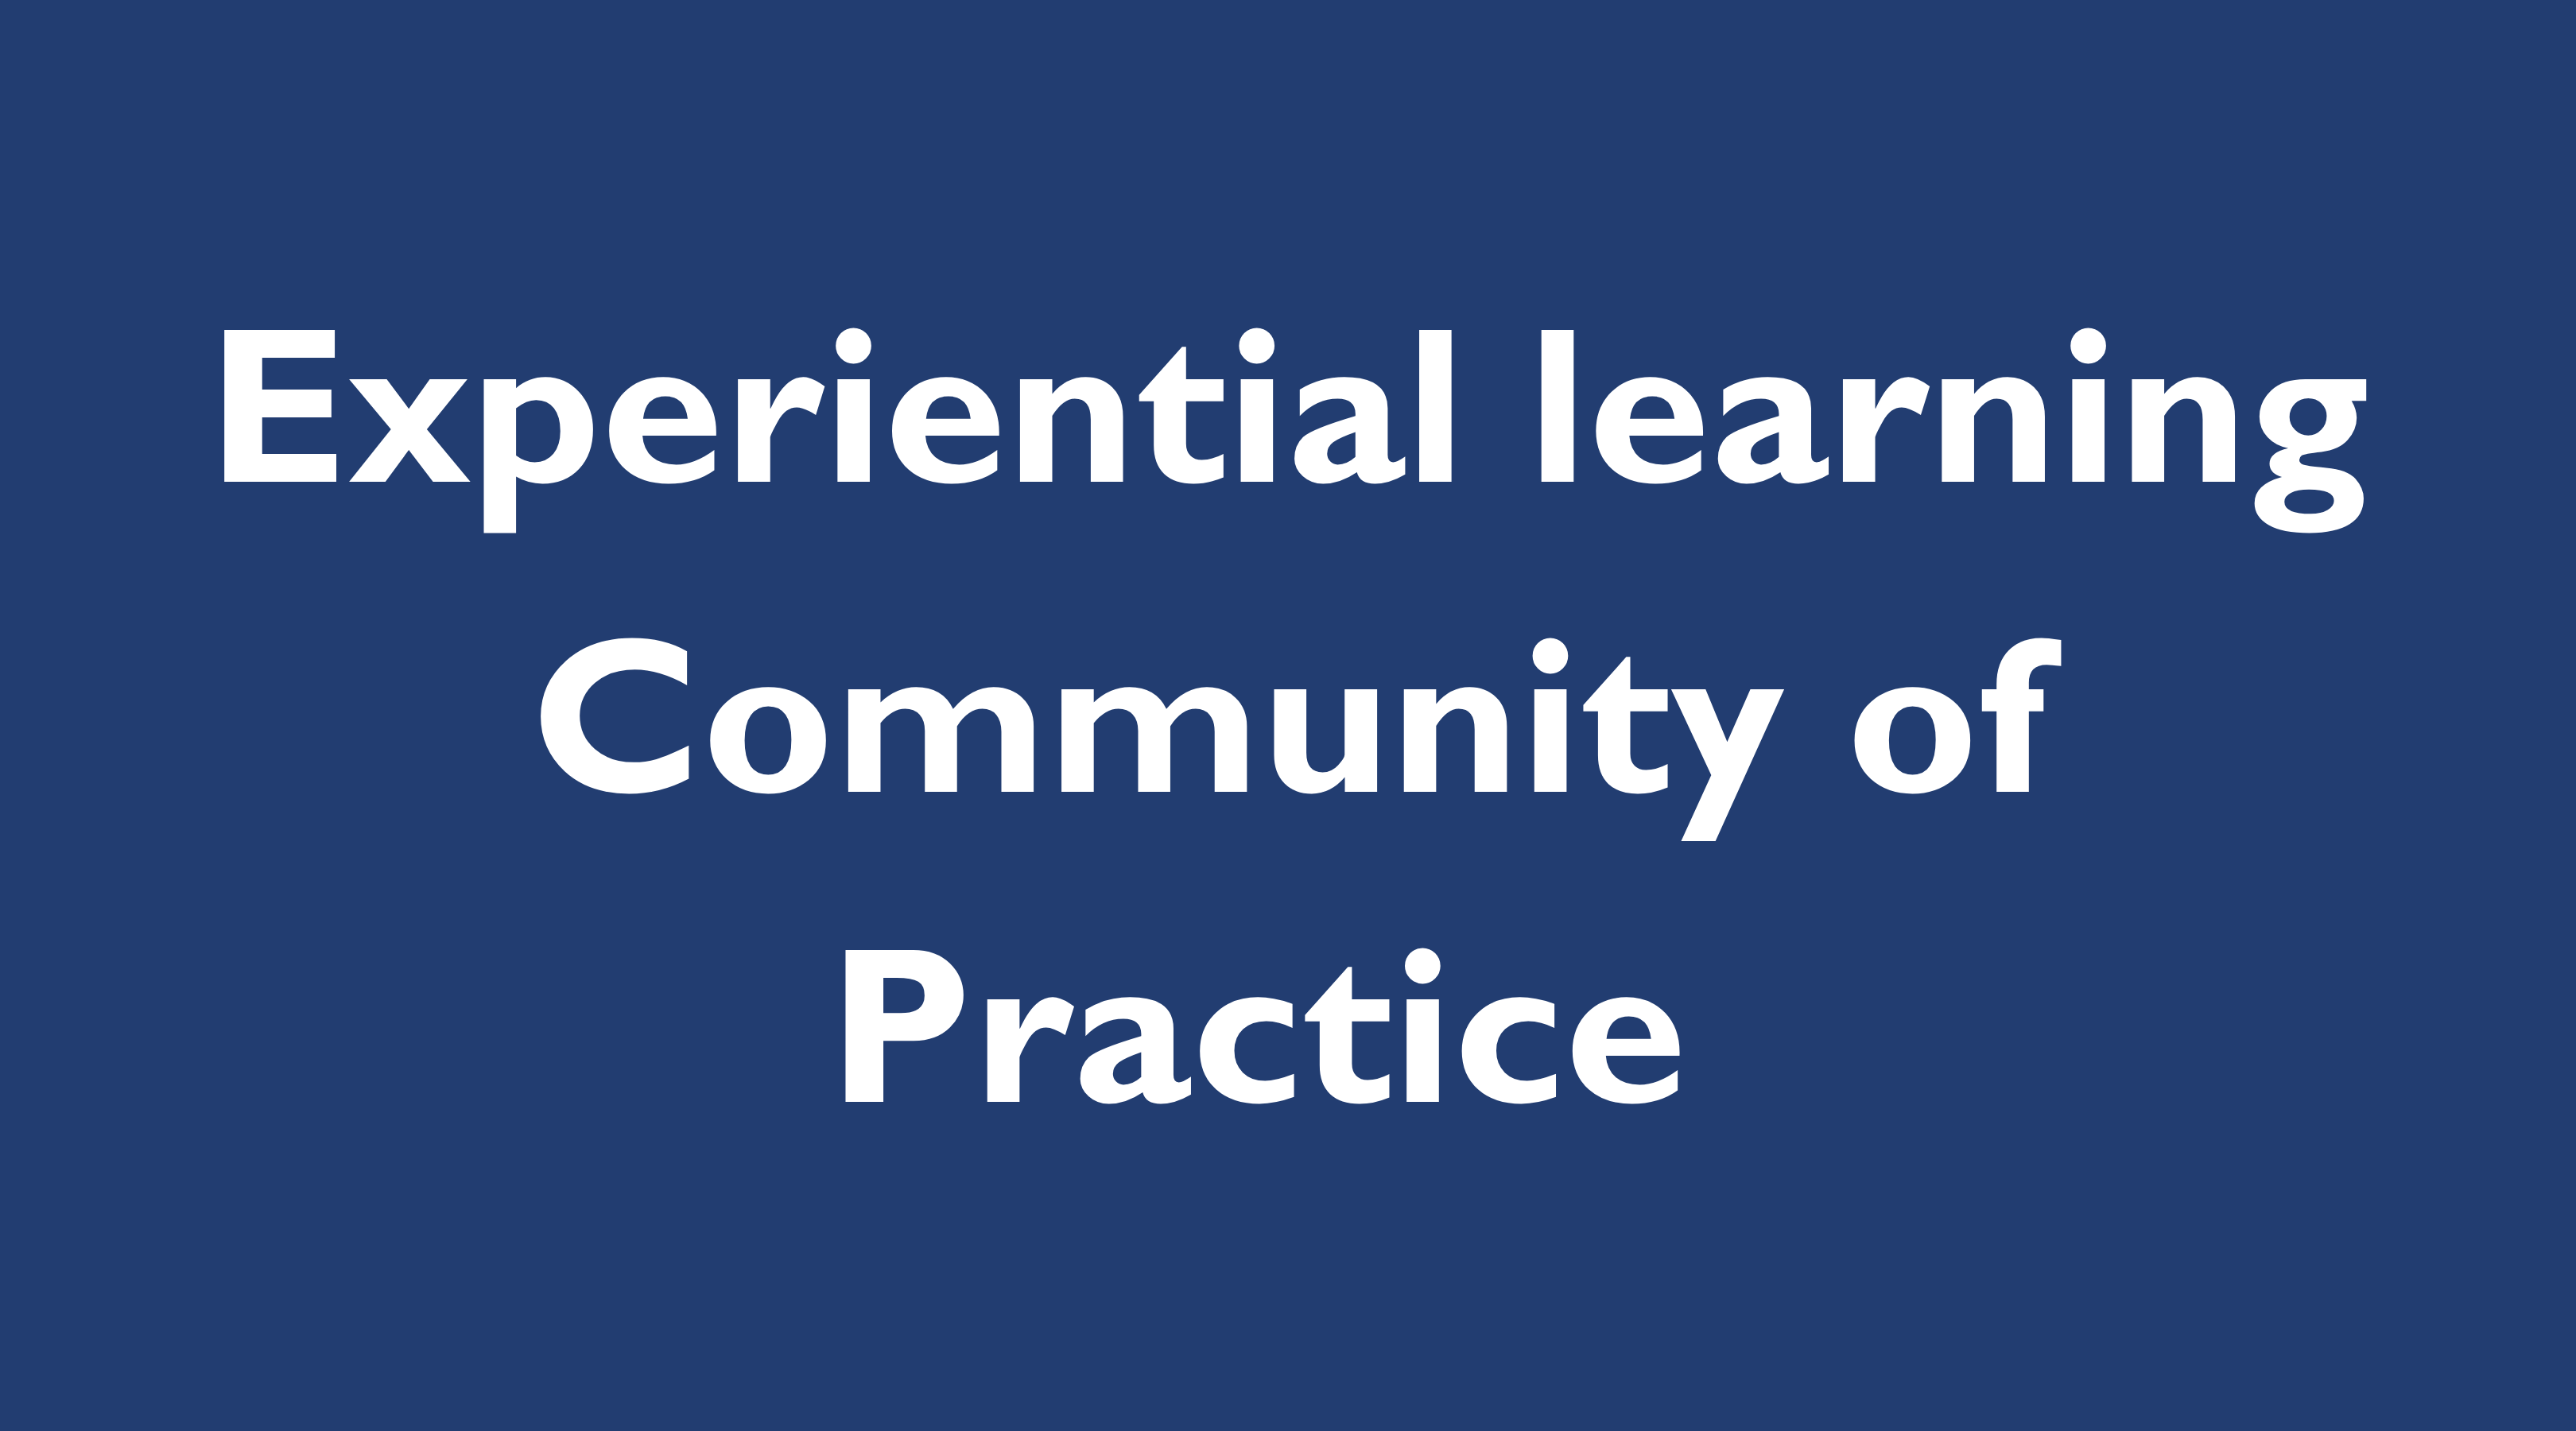 CC Experiential learning Community of Practice.png